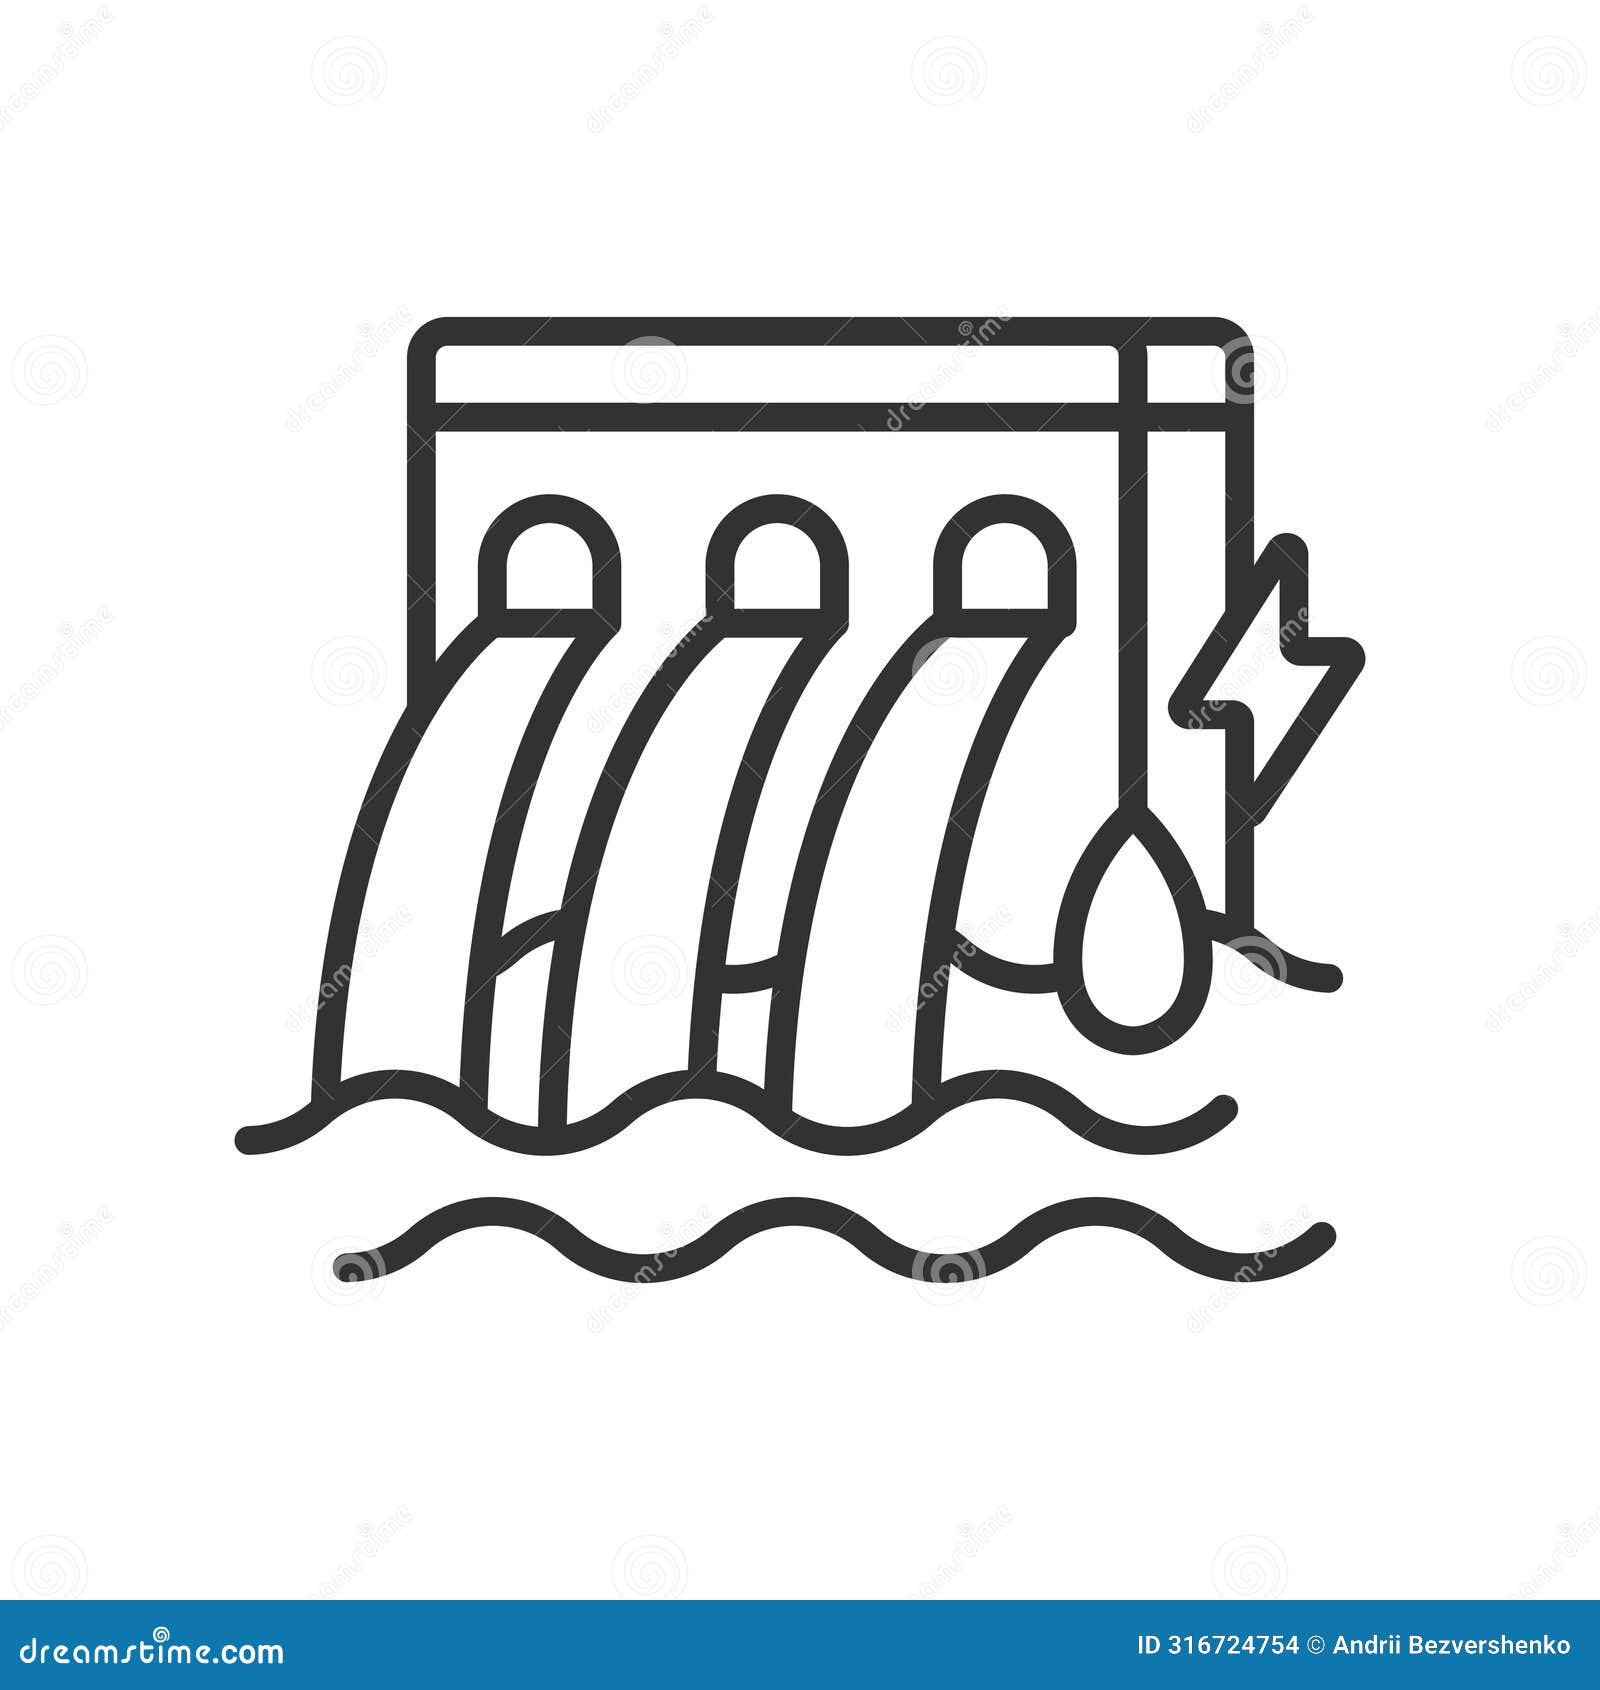 hydroelectricity, in line . hydroelectricity, hydroelectric, power, water, energy on white background 